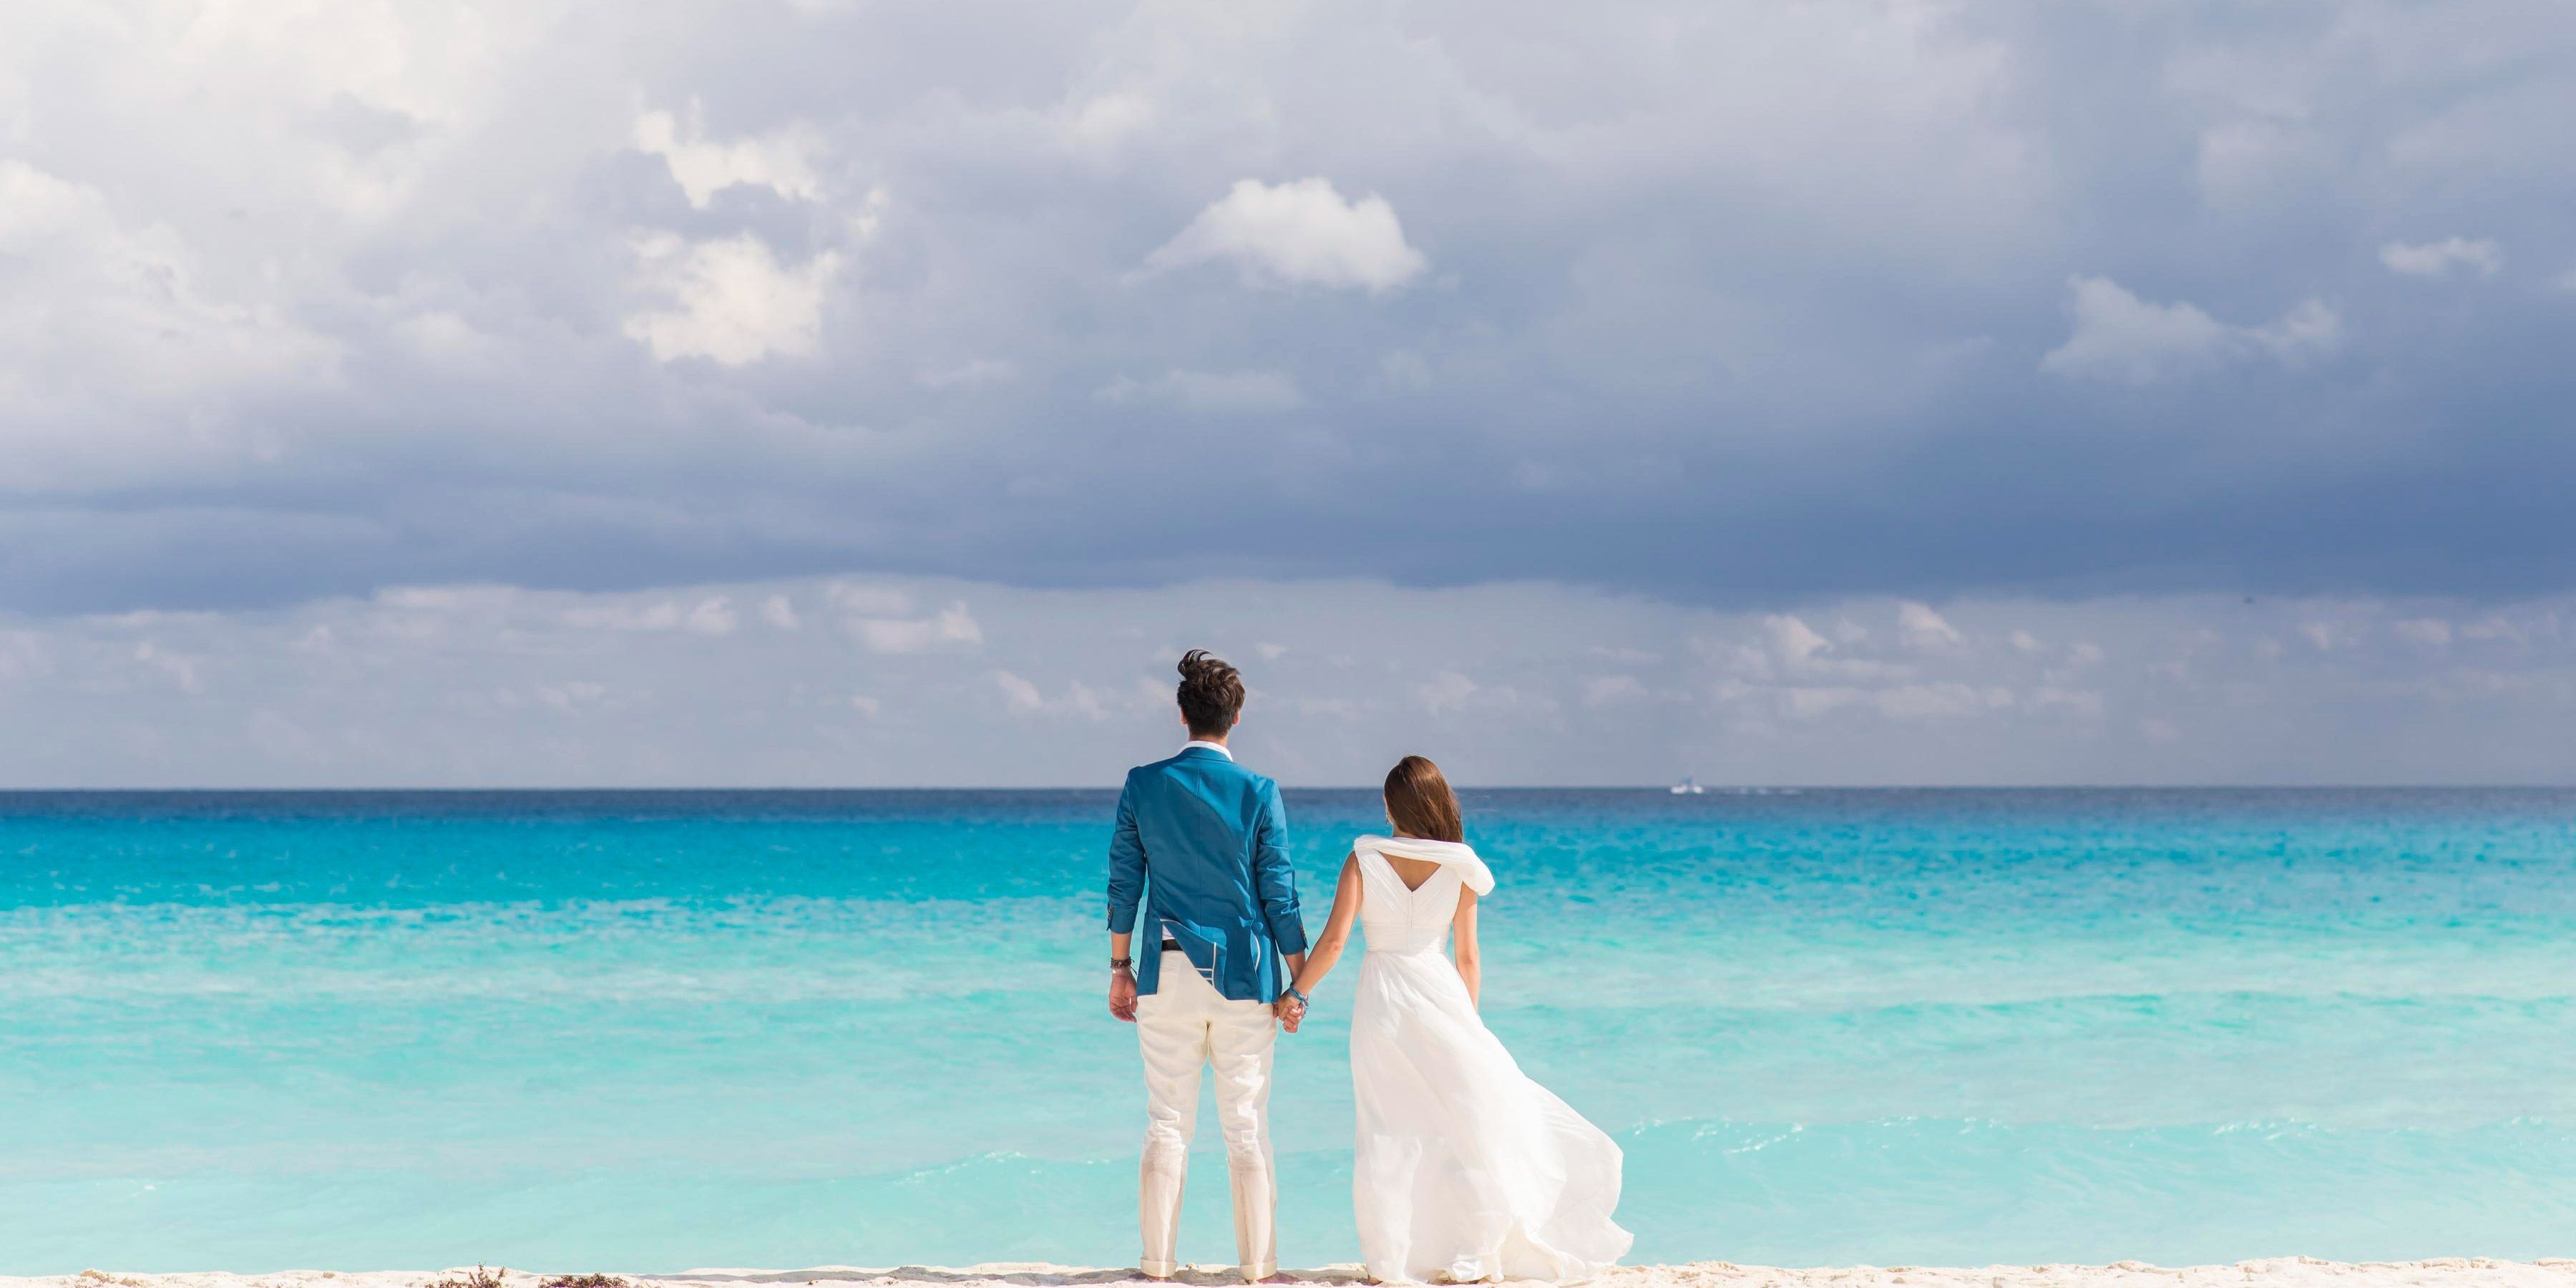 Adults-Only All-Inclusive weddings and honeymoons